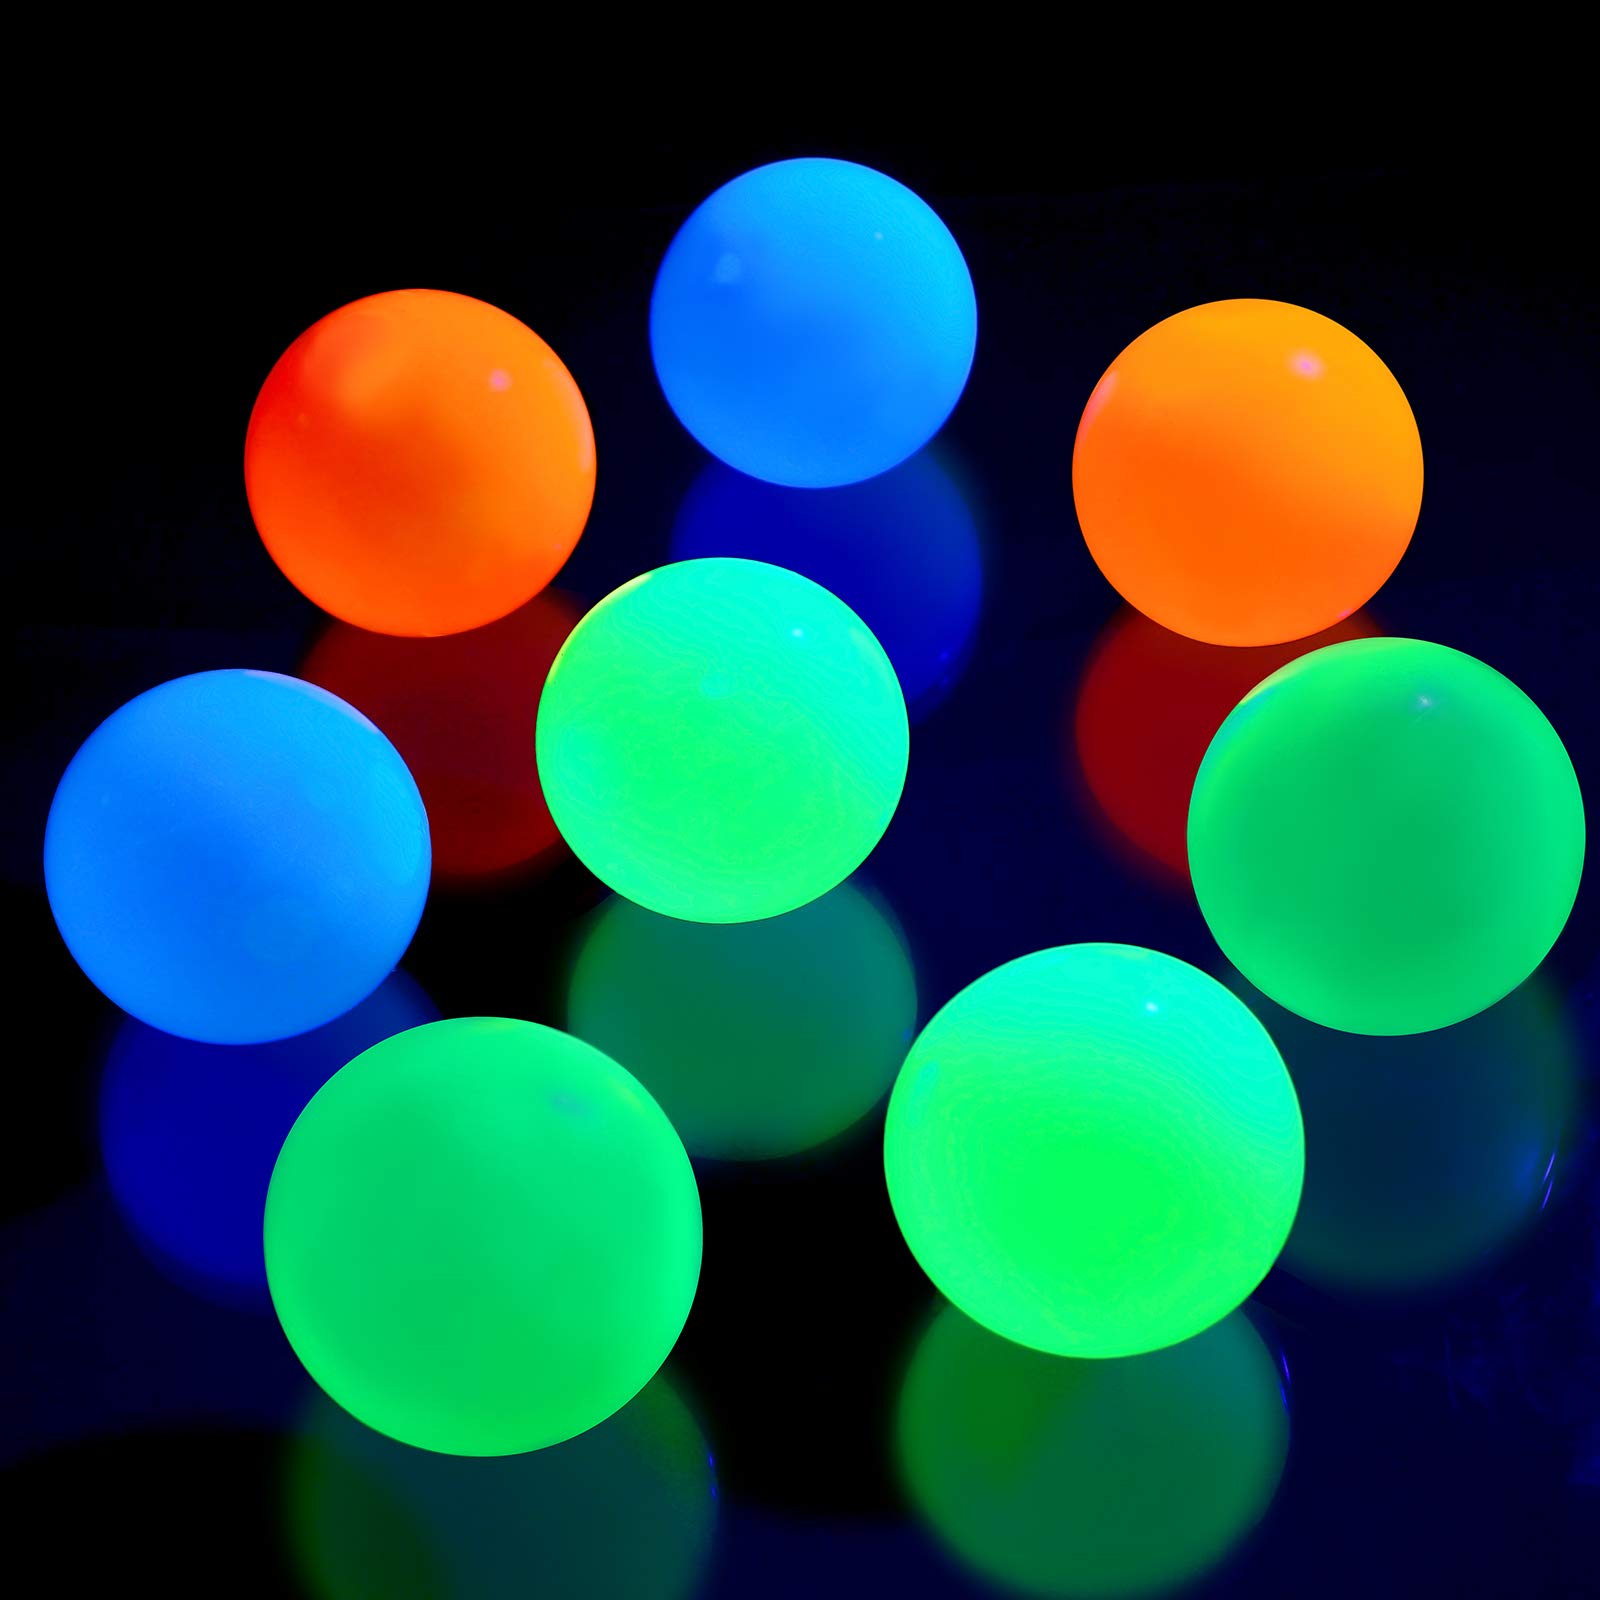 8 Pieces Glow in the Dark Stress Balls Ceiling Balls Sticky Balls That Stick to the Ceiling Glowing Balls for Relax Toy Teens and Adults (White, Blue, Orange, Green,2.6 Inches)